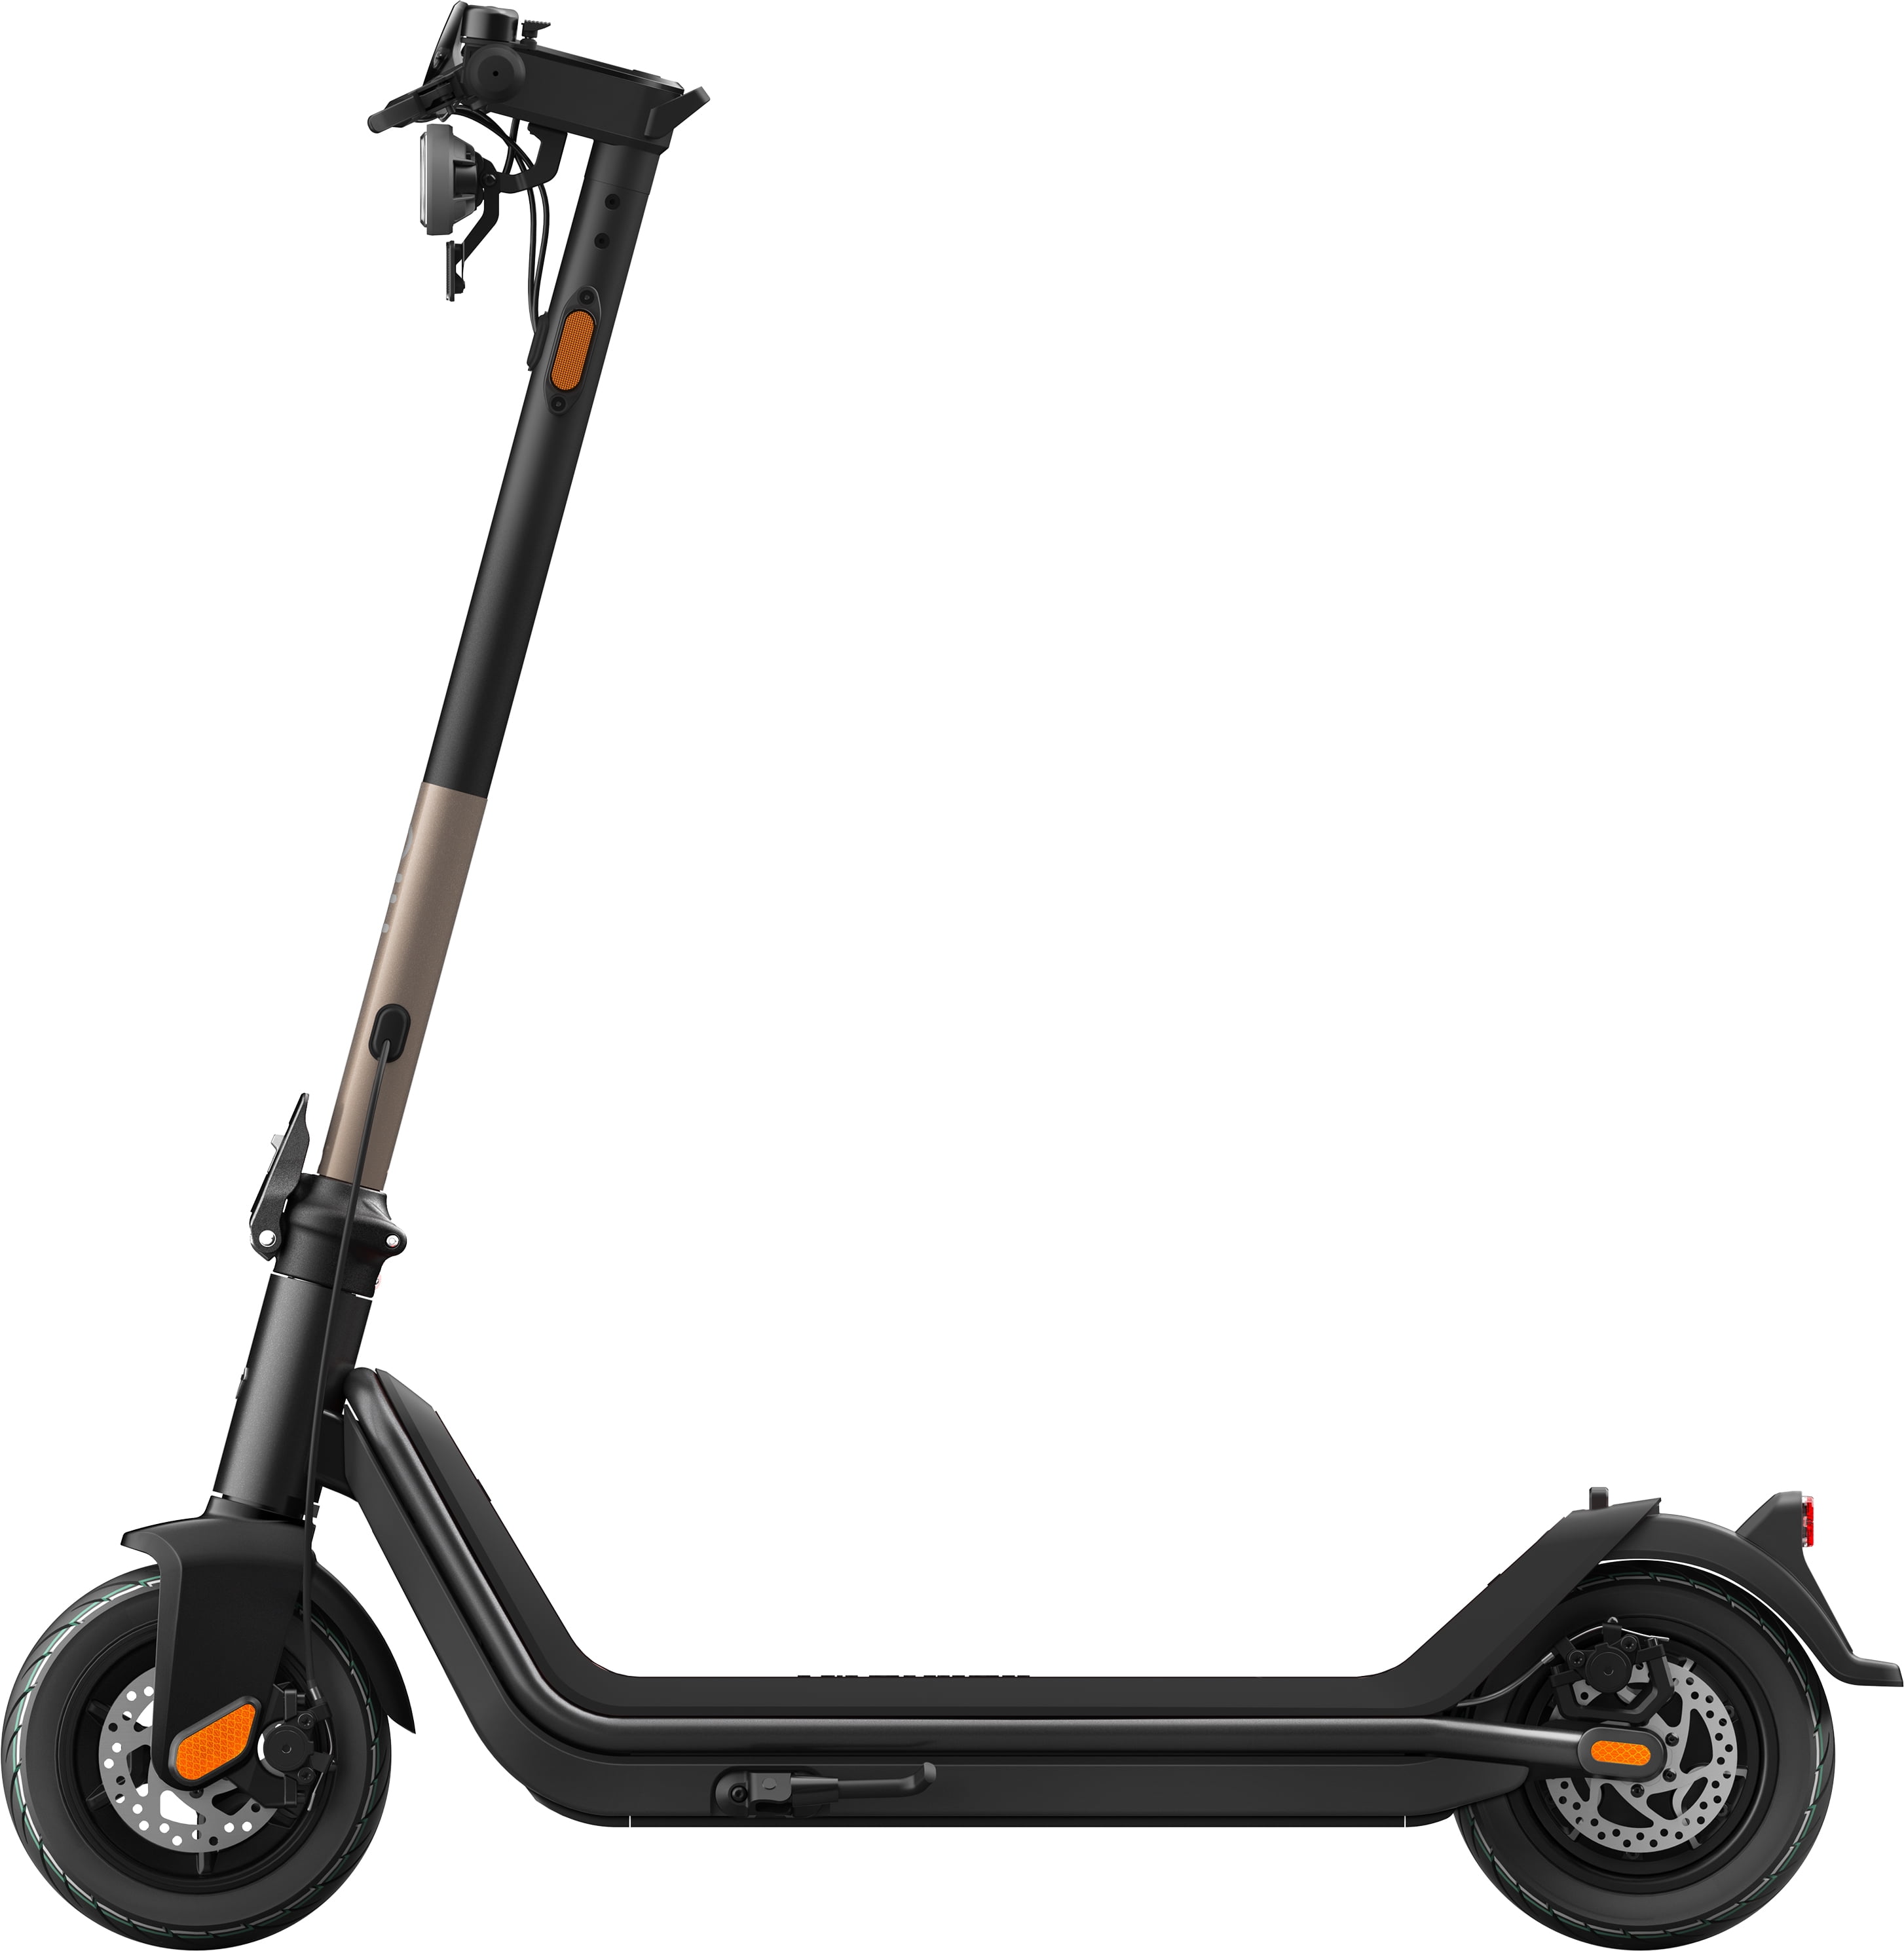 NIU KQi3 Pro Electric Scooter 31 Miles Range Top Speed 20 mph Fast Charging Battery Foldable Commuting - Walmart.com